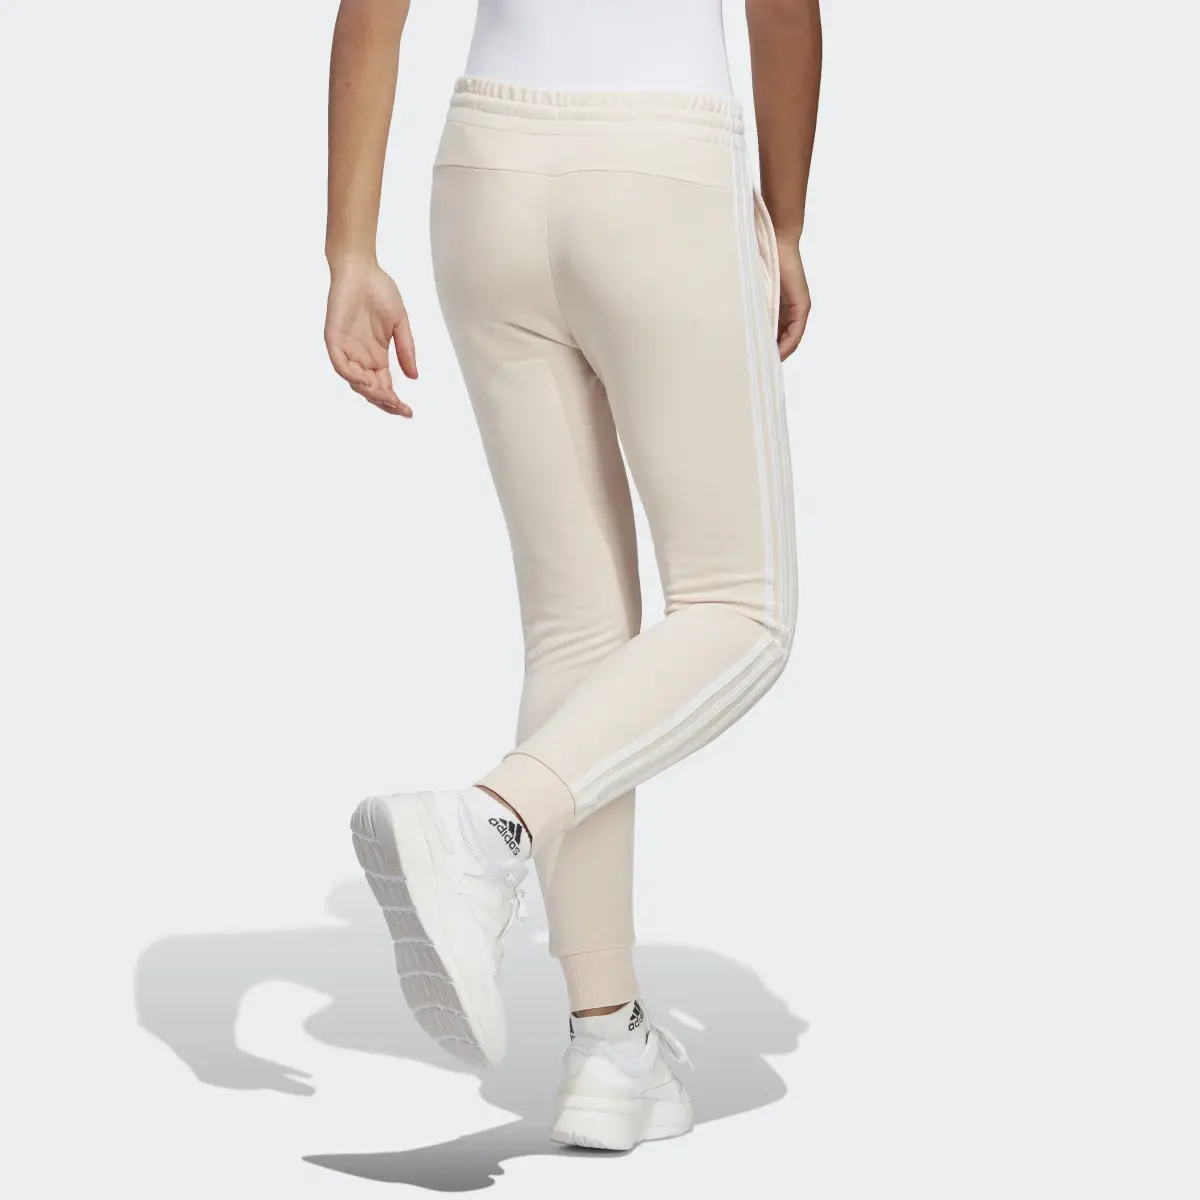 Adidas Essentials 3-Stripes French Terry Cuffed Pants. 2